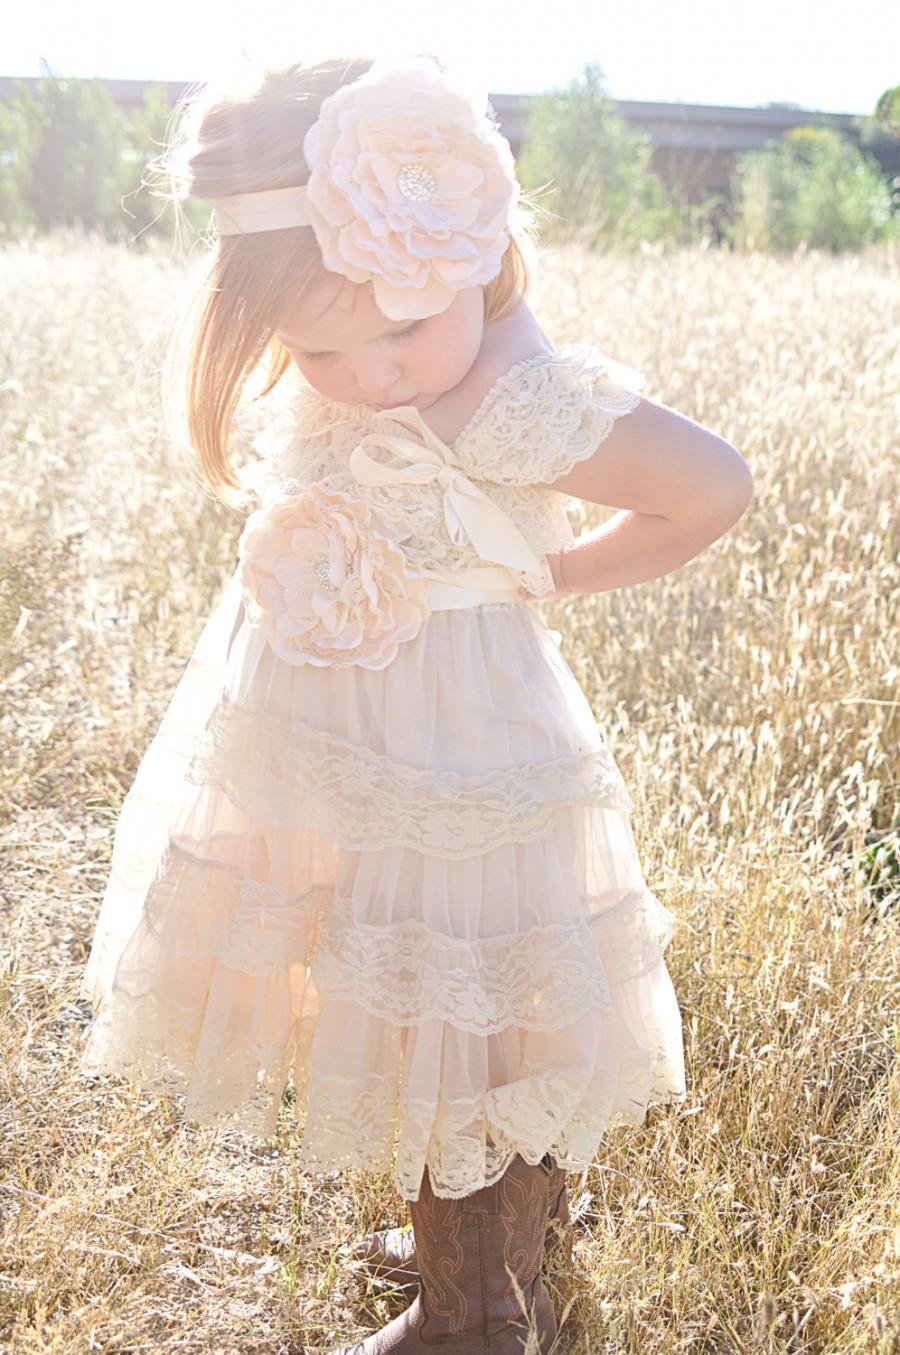 Mariage - Champagne Flower Girl Dress -Lace Pettidress -Vintage Flower Girl- Shabby Chic Flower Girl Dress -Girls Dresses - Rustic Flower Girl Dress